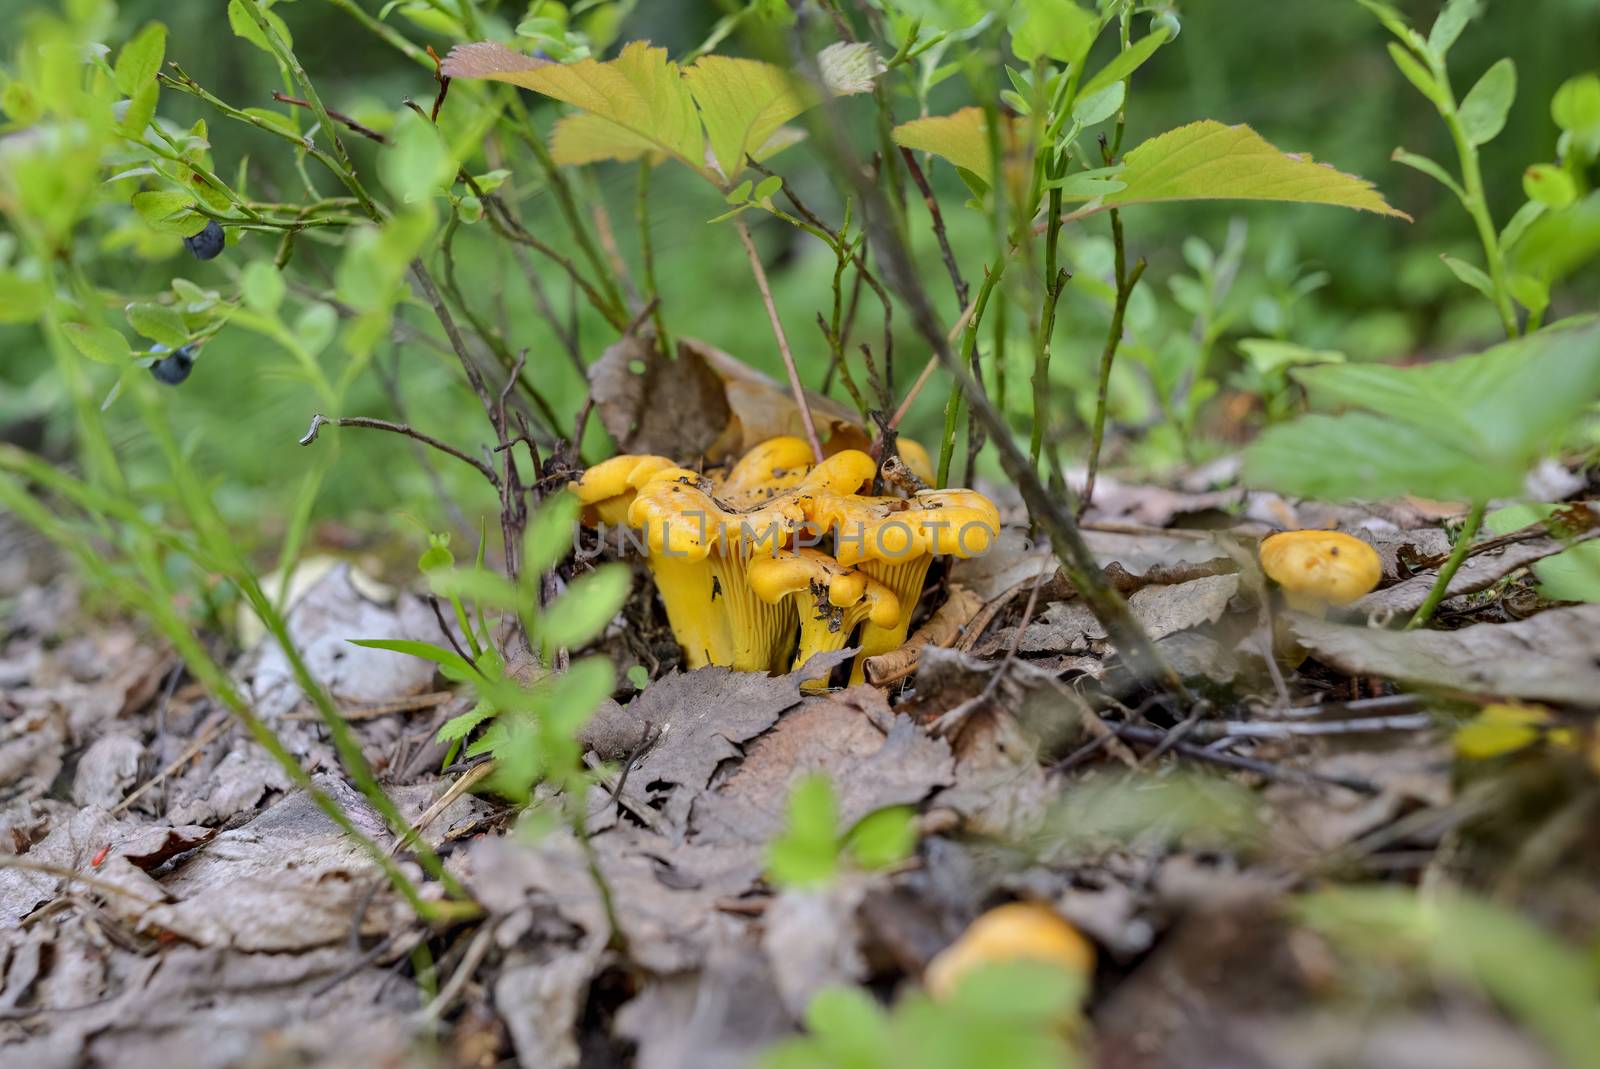 Family of yellow mushrooms in a forest litter of leaves. by vladali